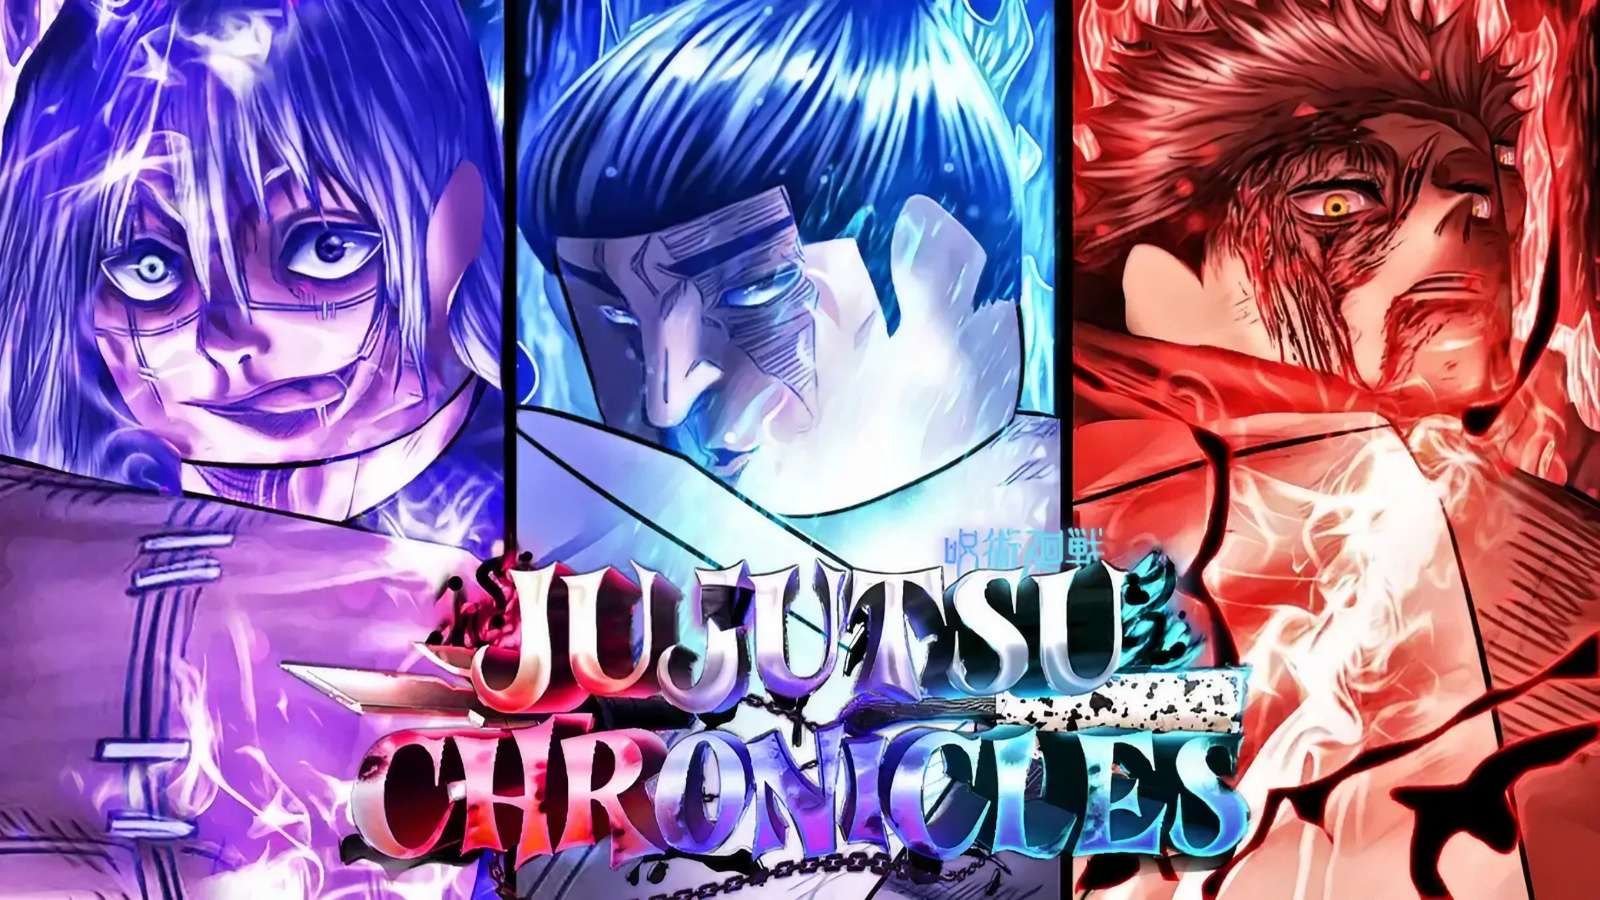 Cover art for Jujutsu Chronicles.